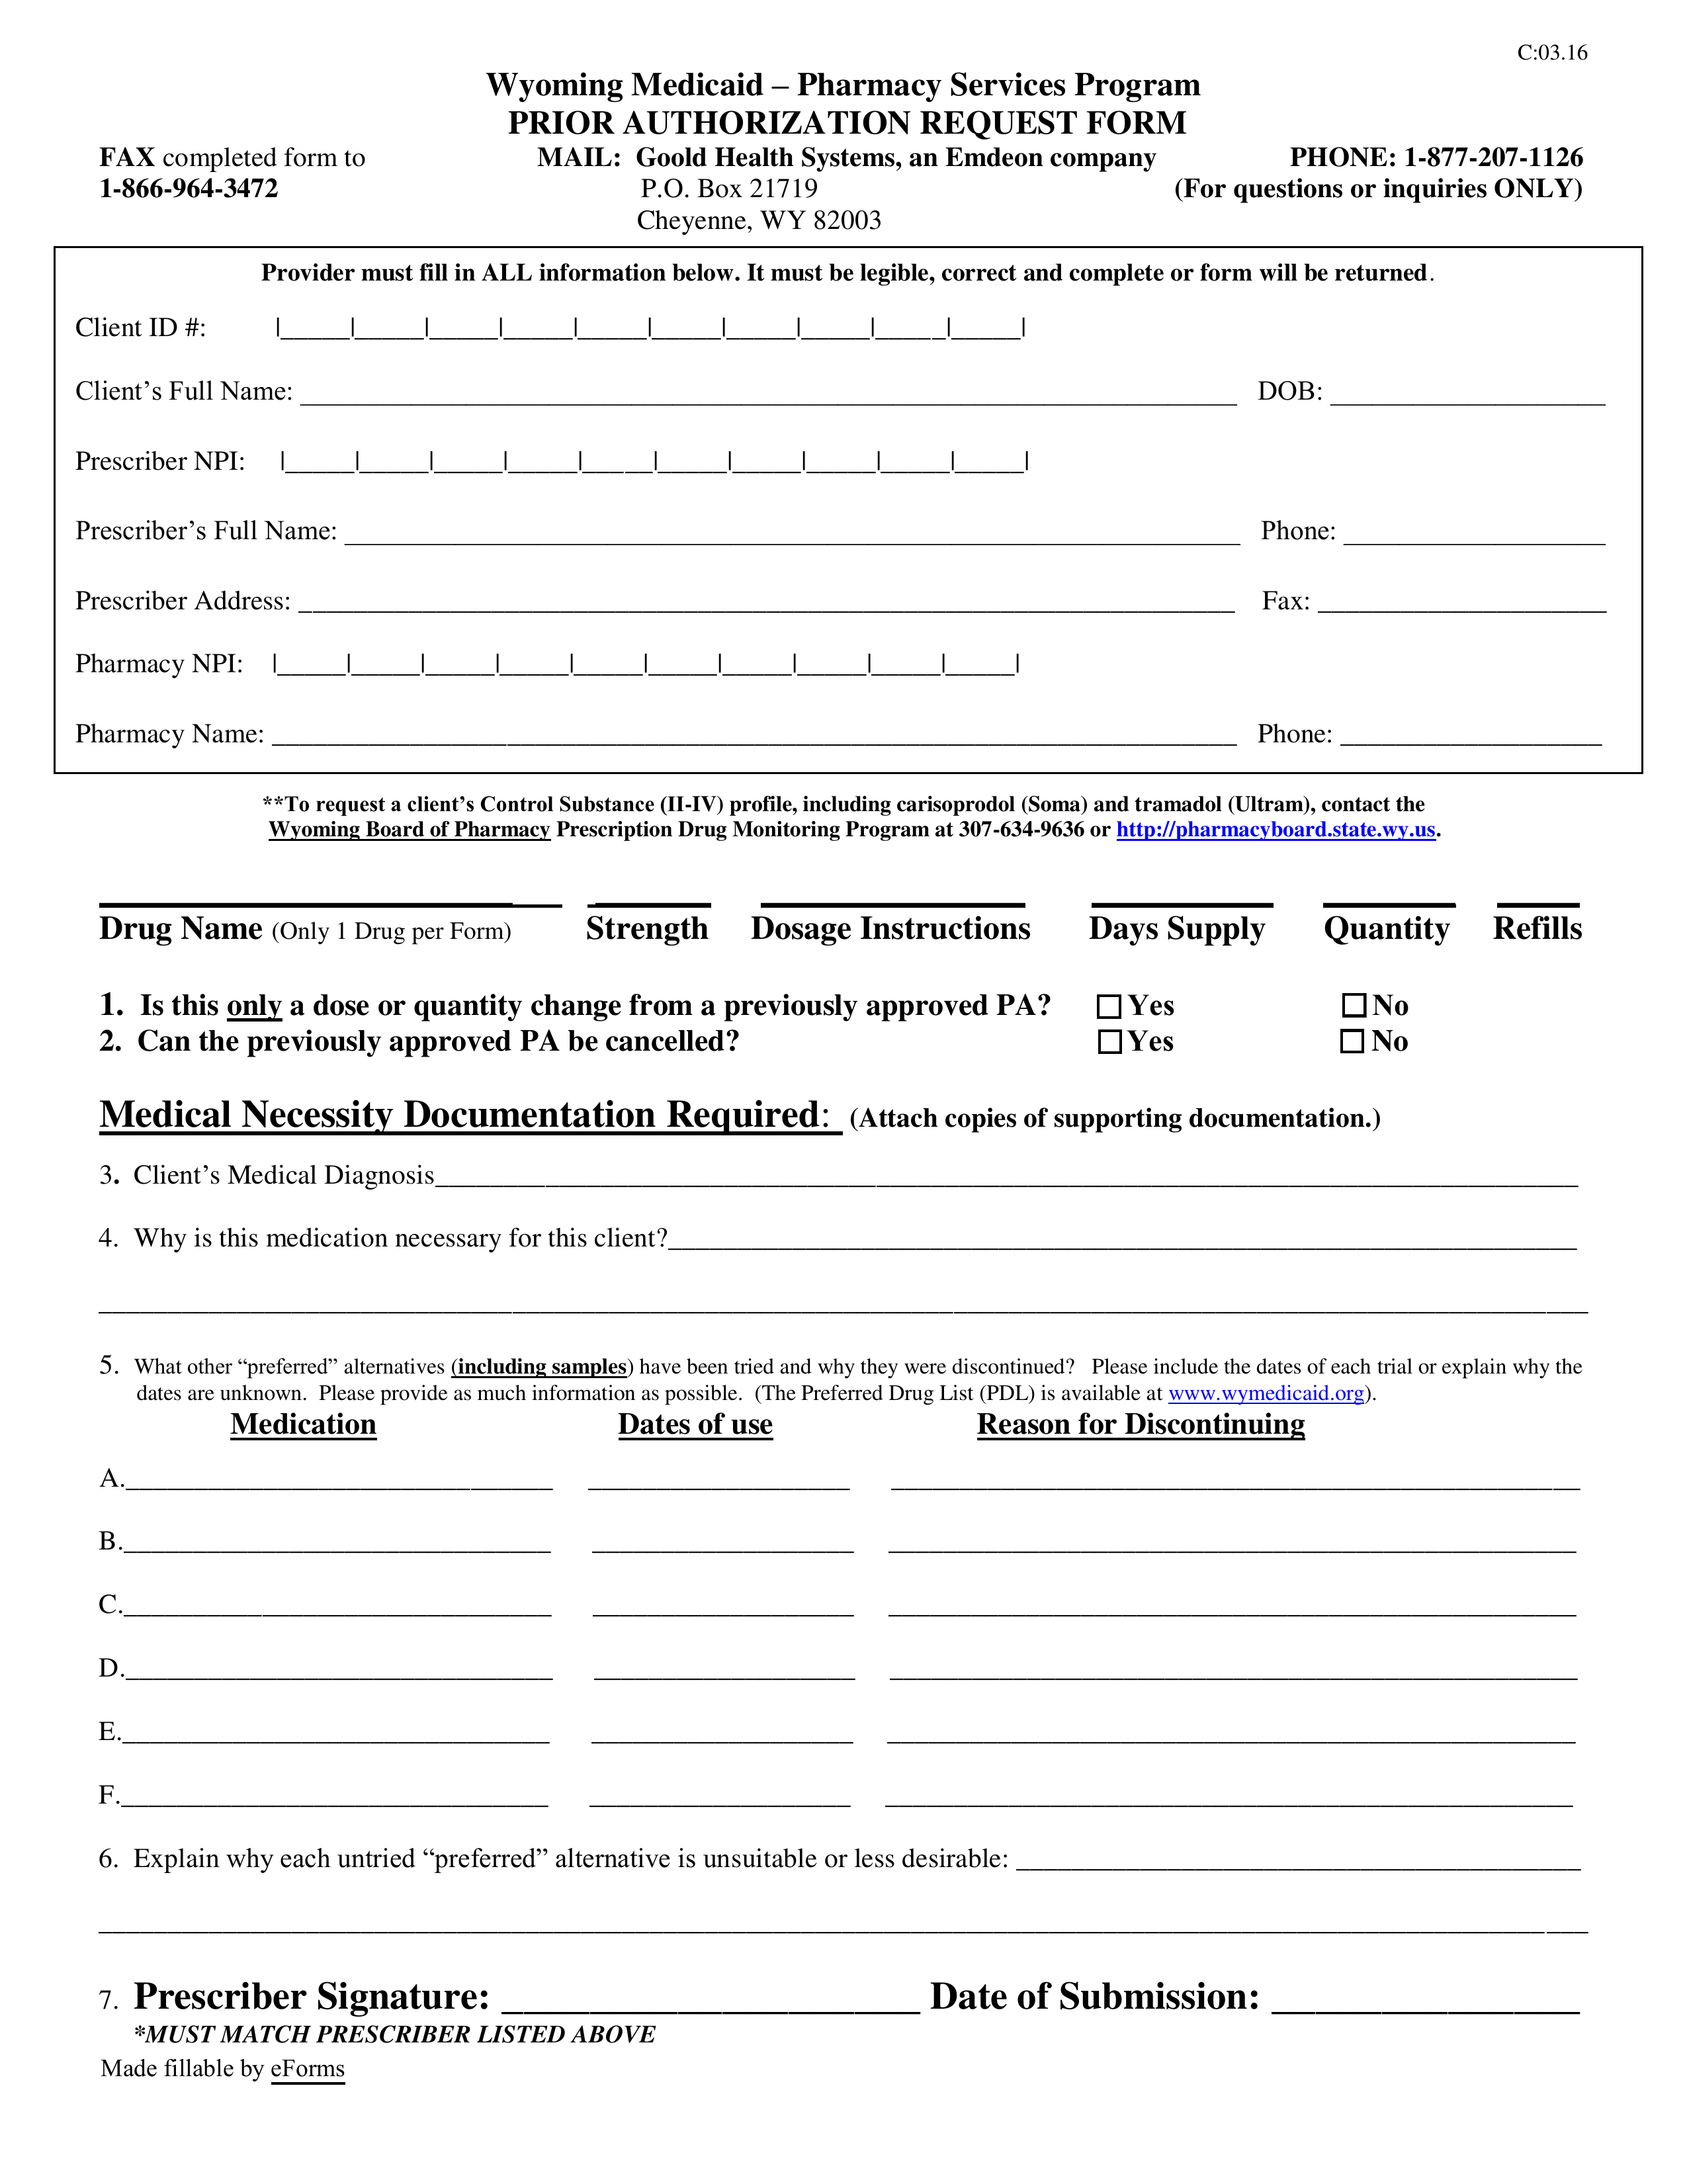 Wyoming Medicaid Prior (Rx) Authorization Form